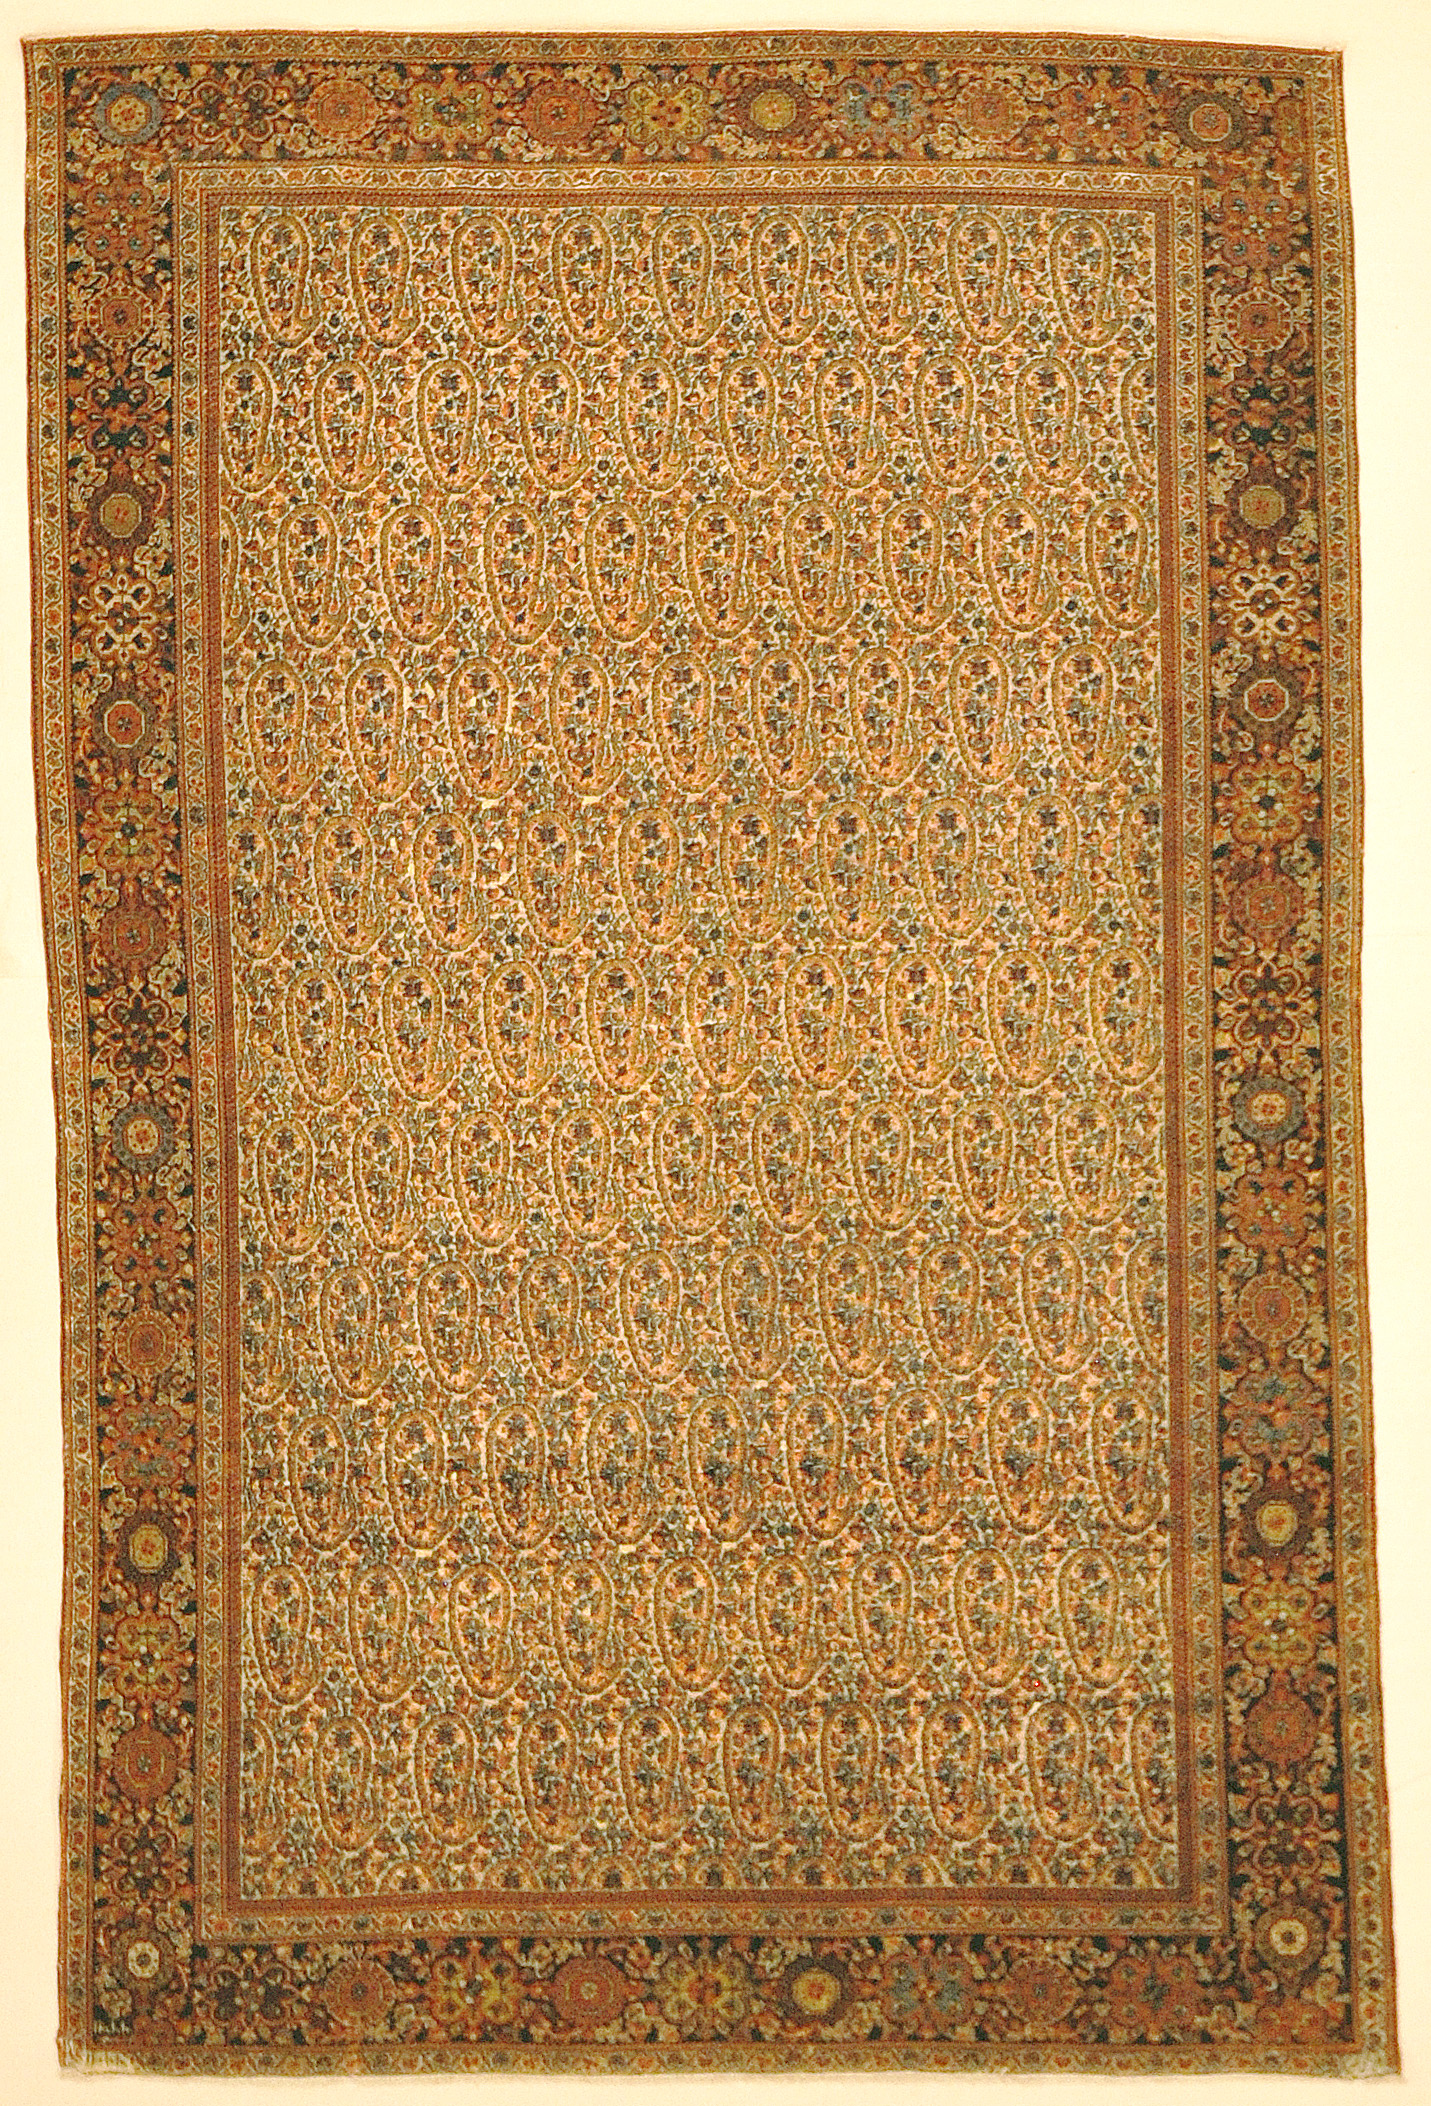 Dated Farahan Botteh (Paisley) Pattern Genuine Woven Carpet Art Authentic Intricate Rug Santa Barbara Design Center Rugs and More